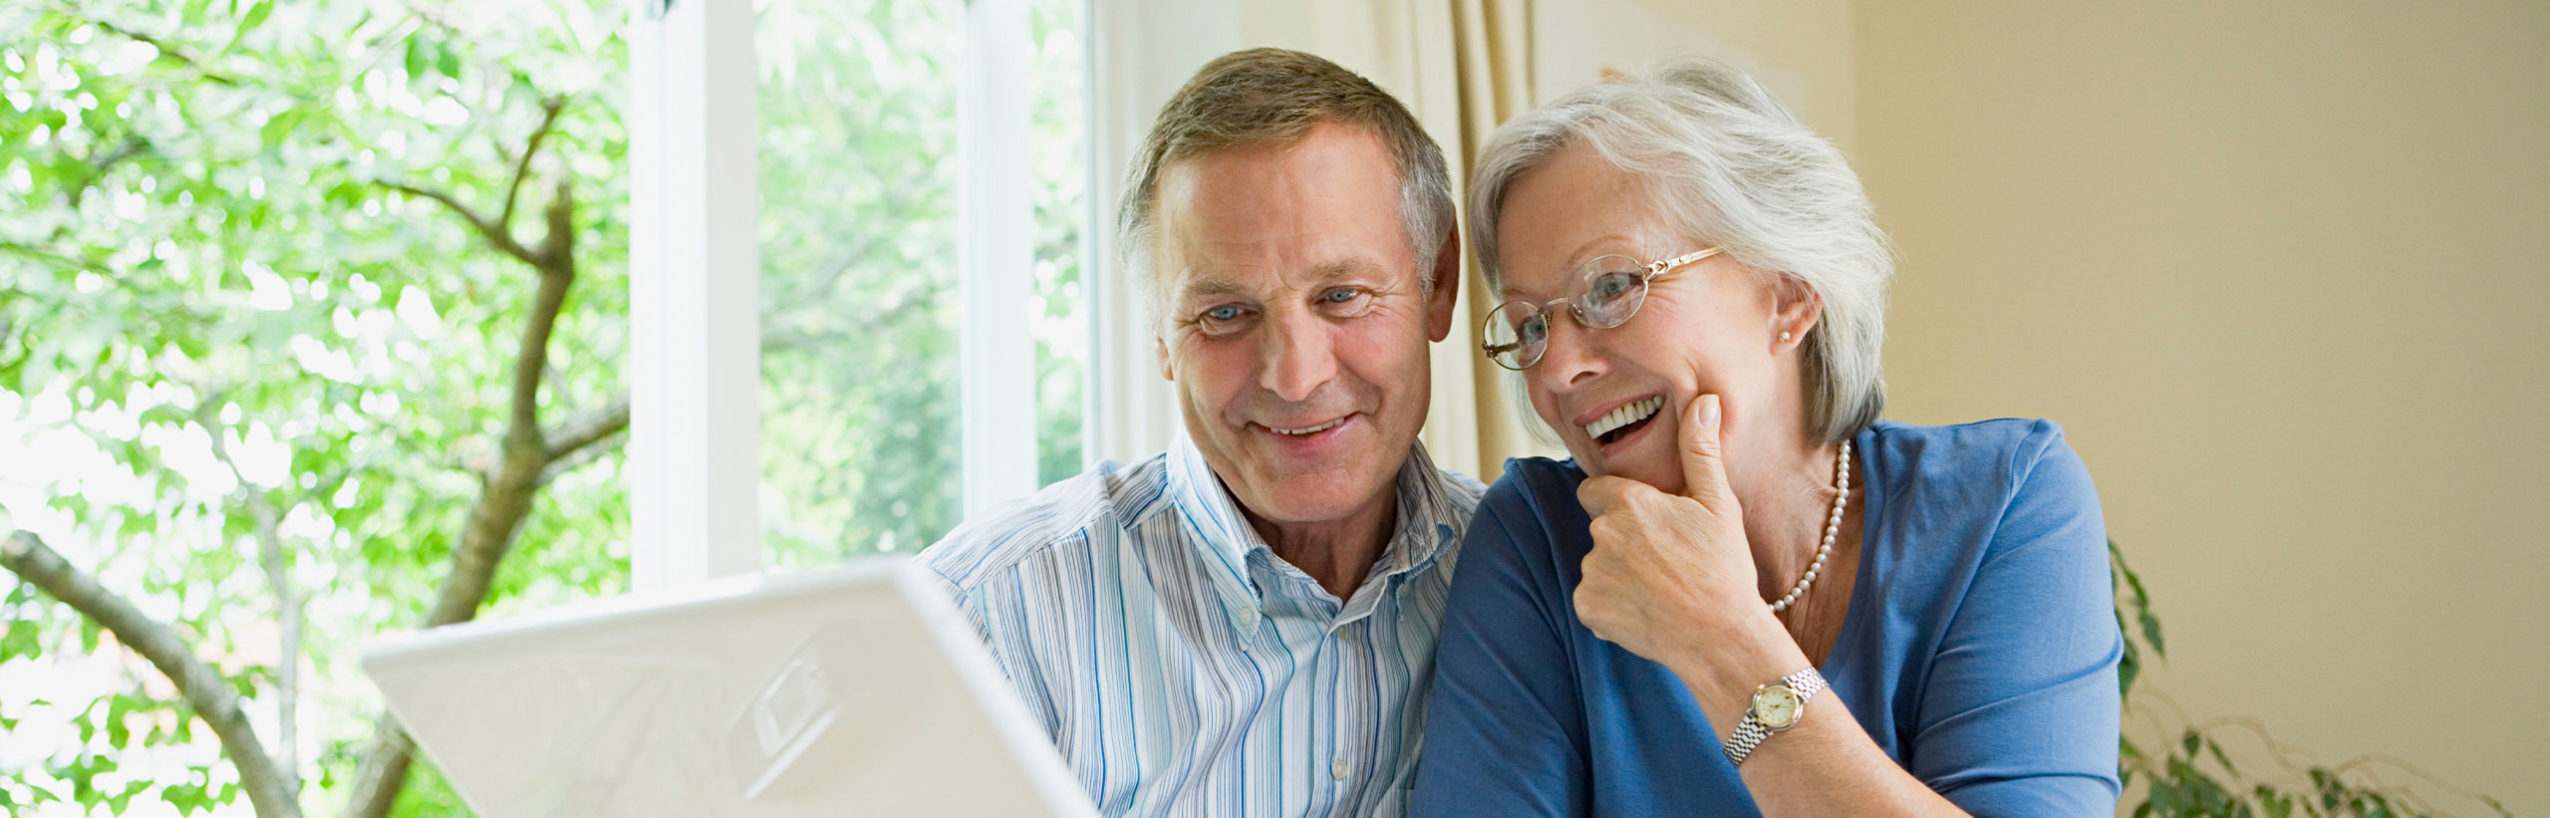 older couple looking at computer and travel guide books